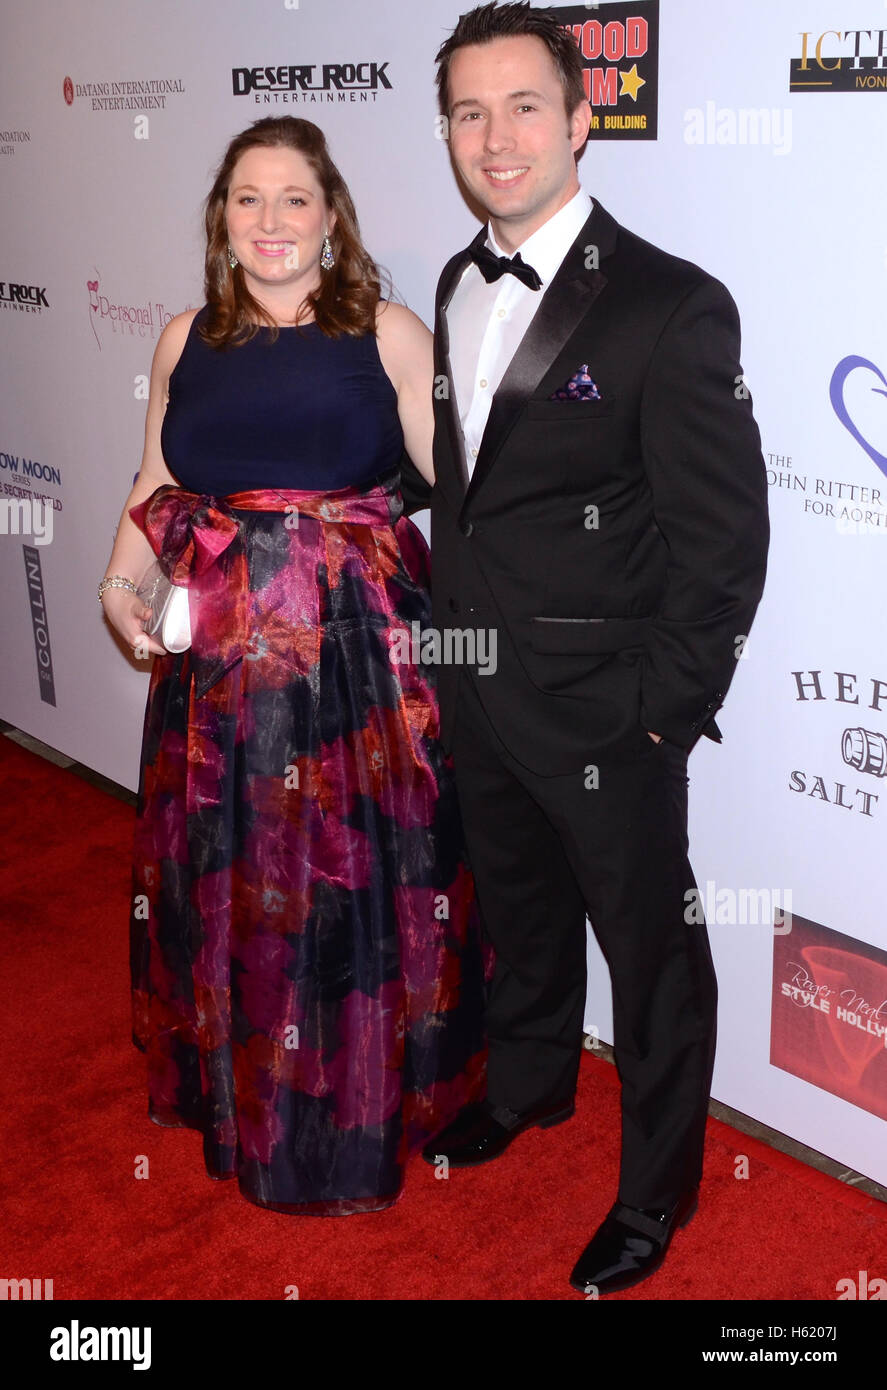 Danielle Beer And Brian Beer Arrives At The 1st Annual Roger Neal Style Hollywood Oscar Viewing 